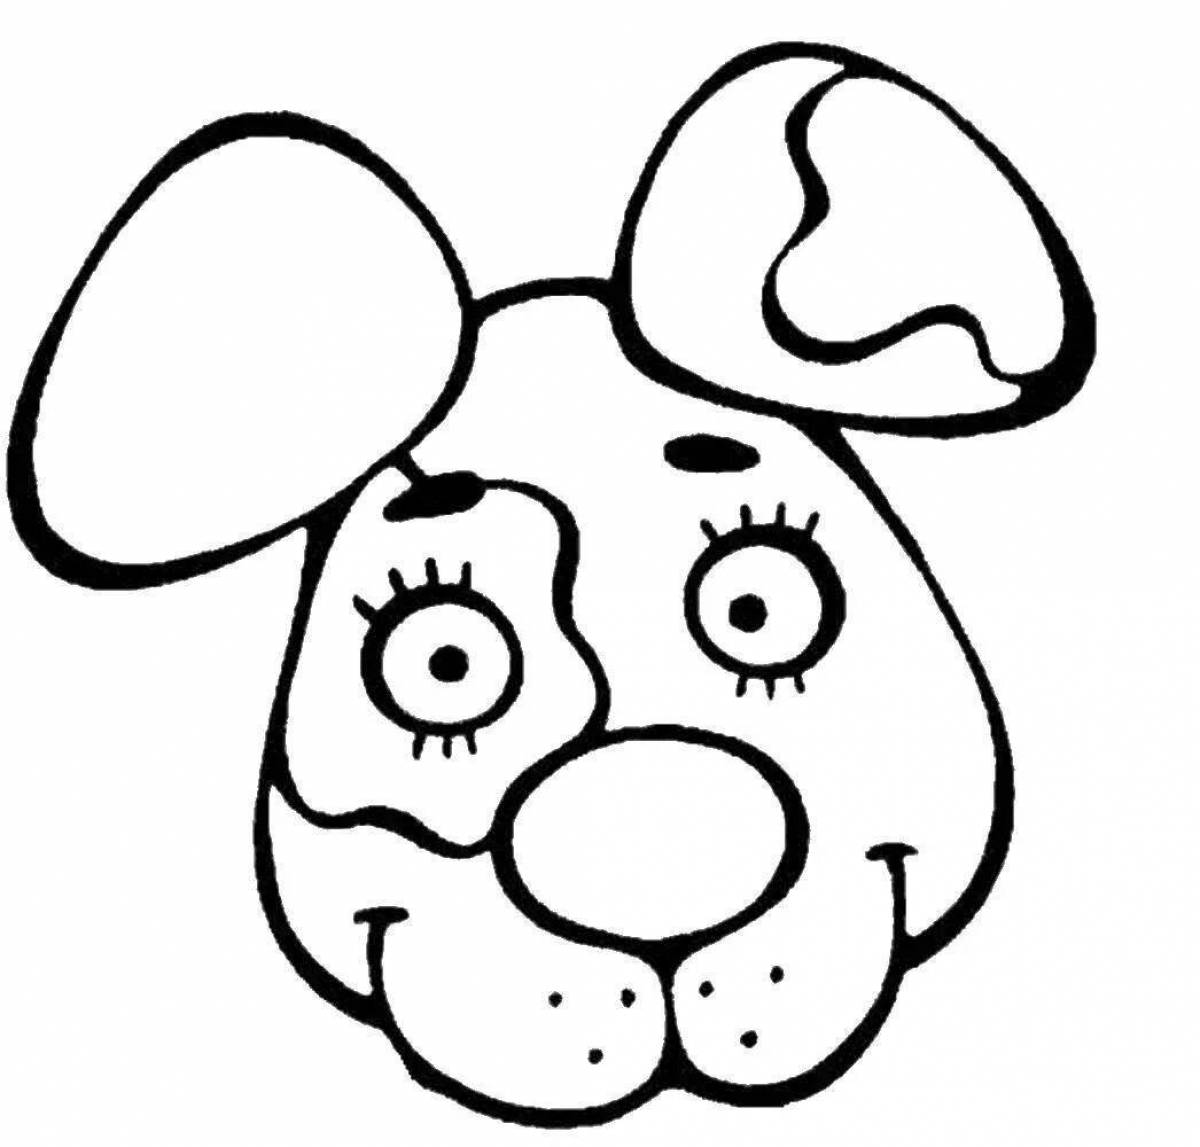 Cute dog face coloring page